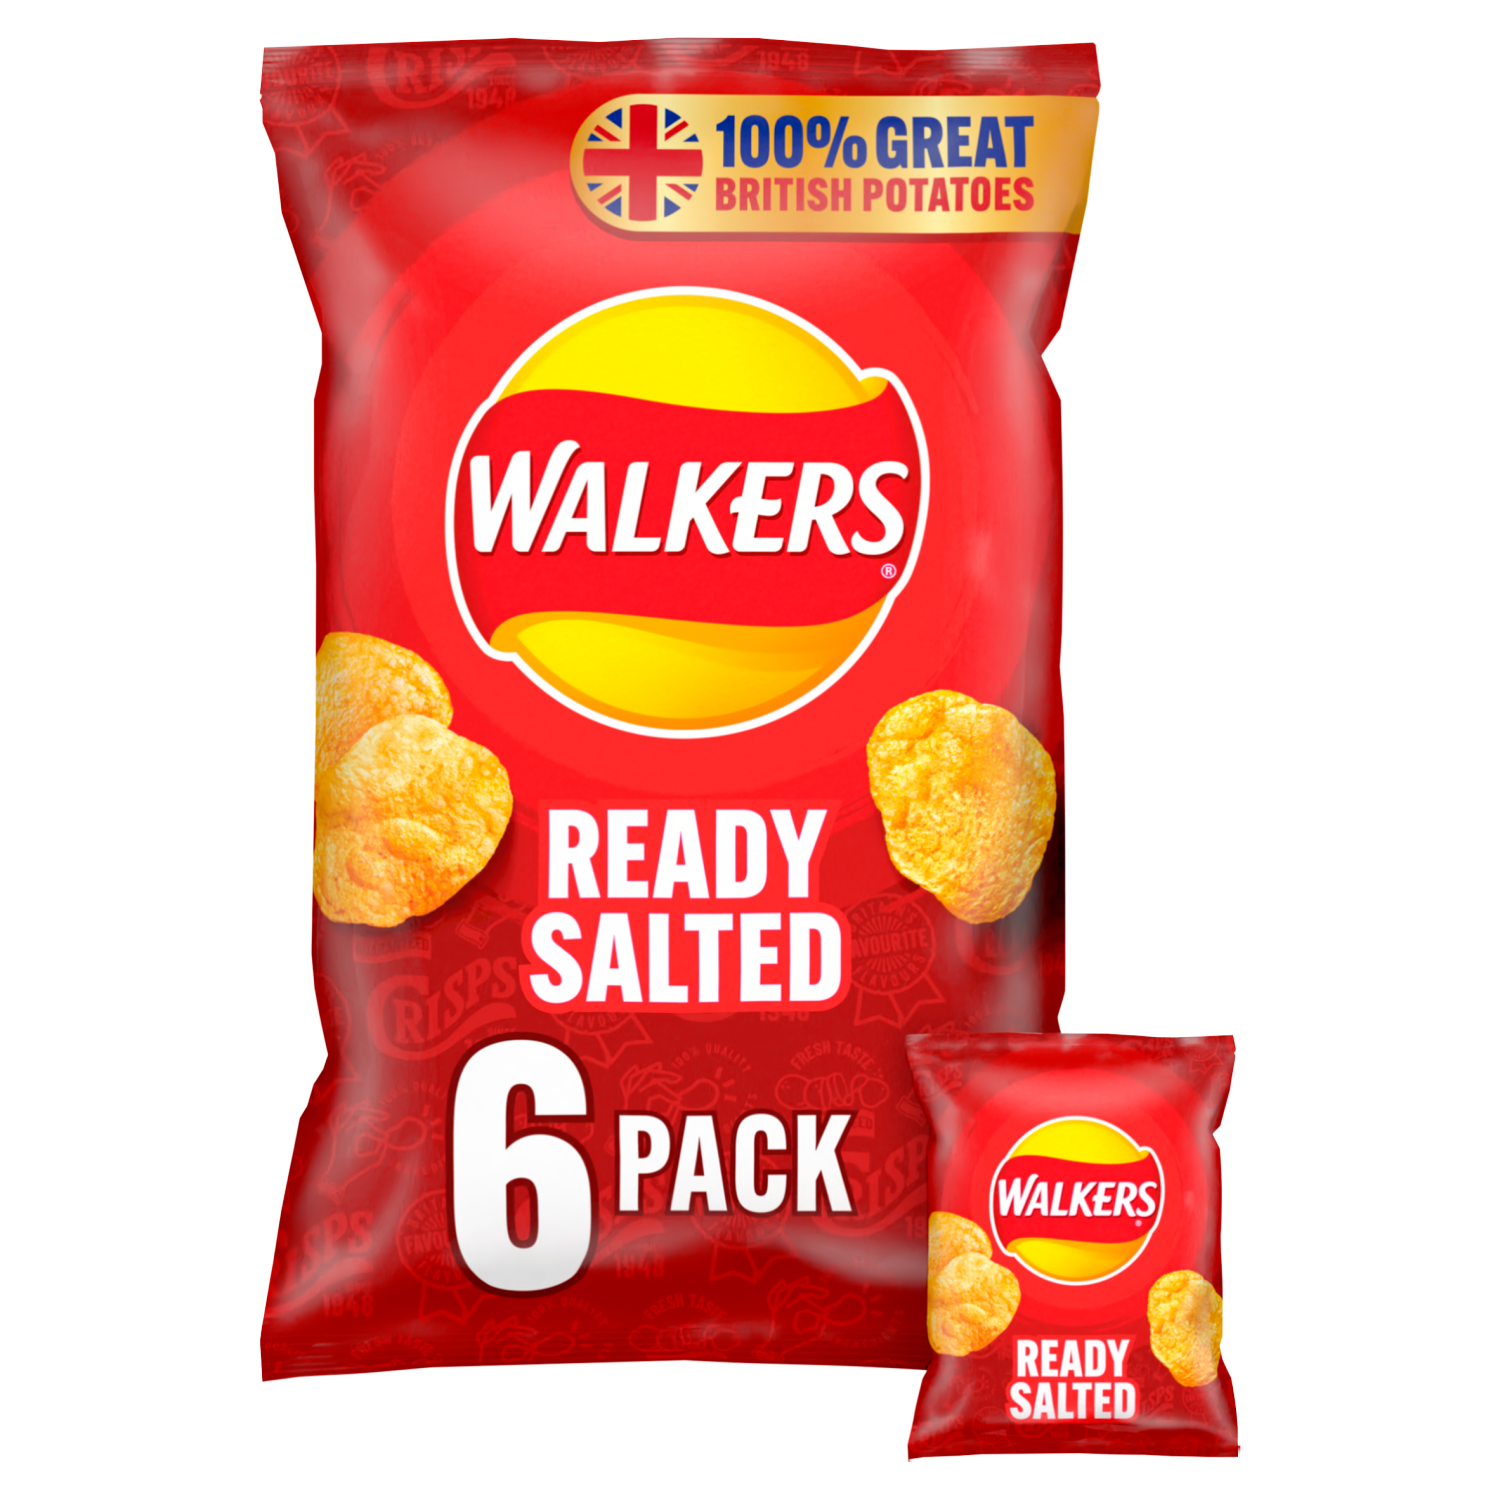 Walkers Crisps Chips Ready Salted 6-Pack / 6 x 25g